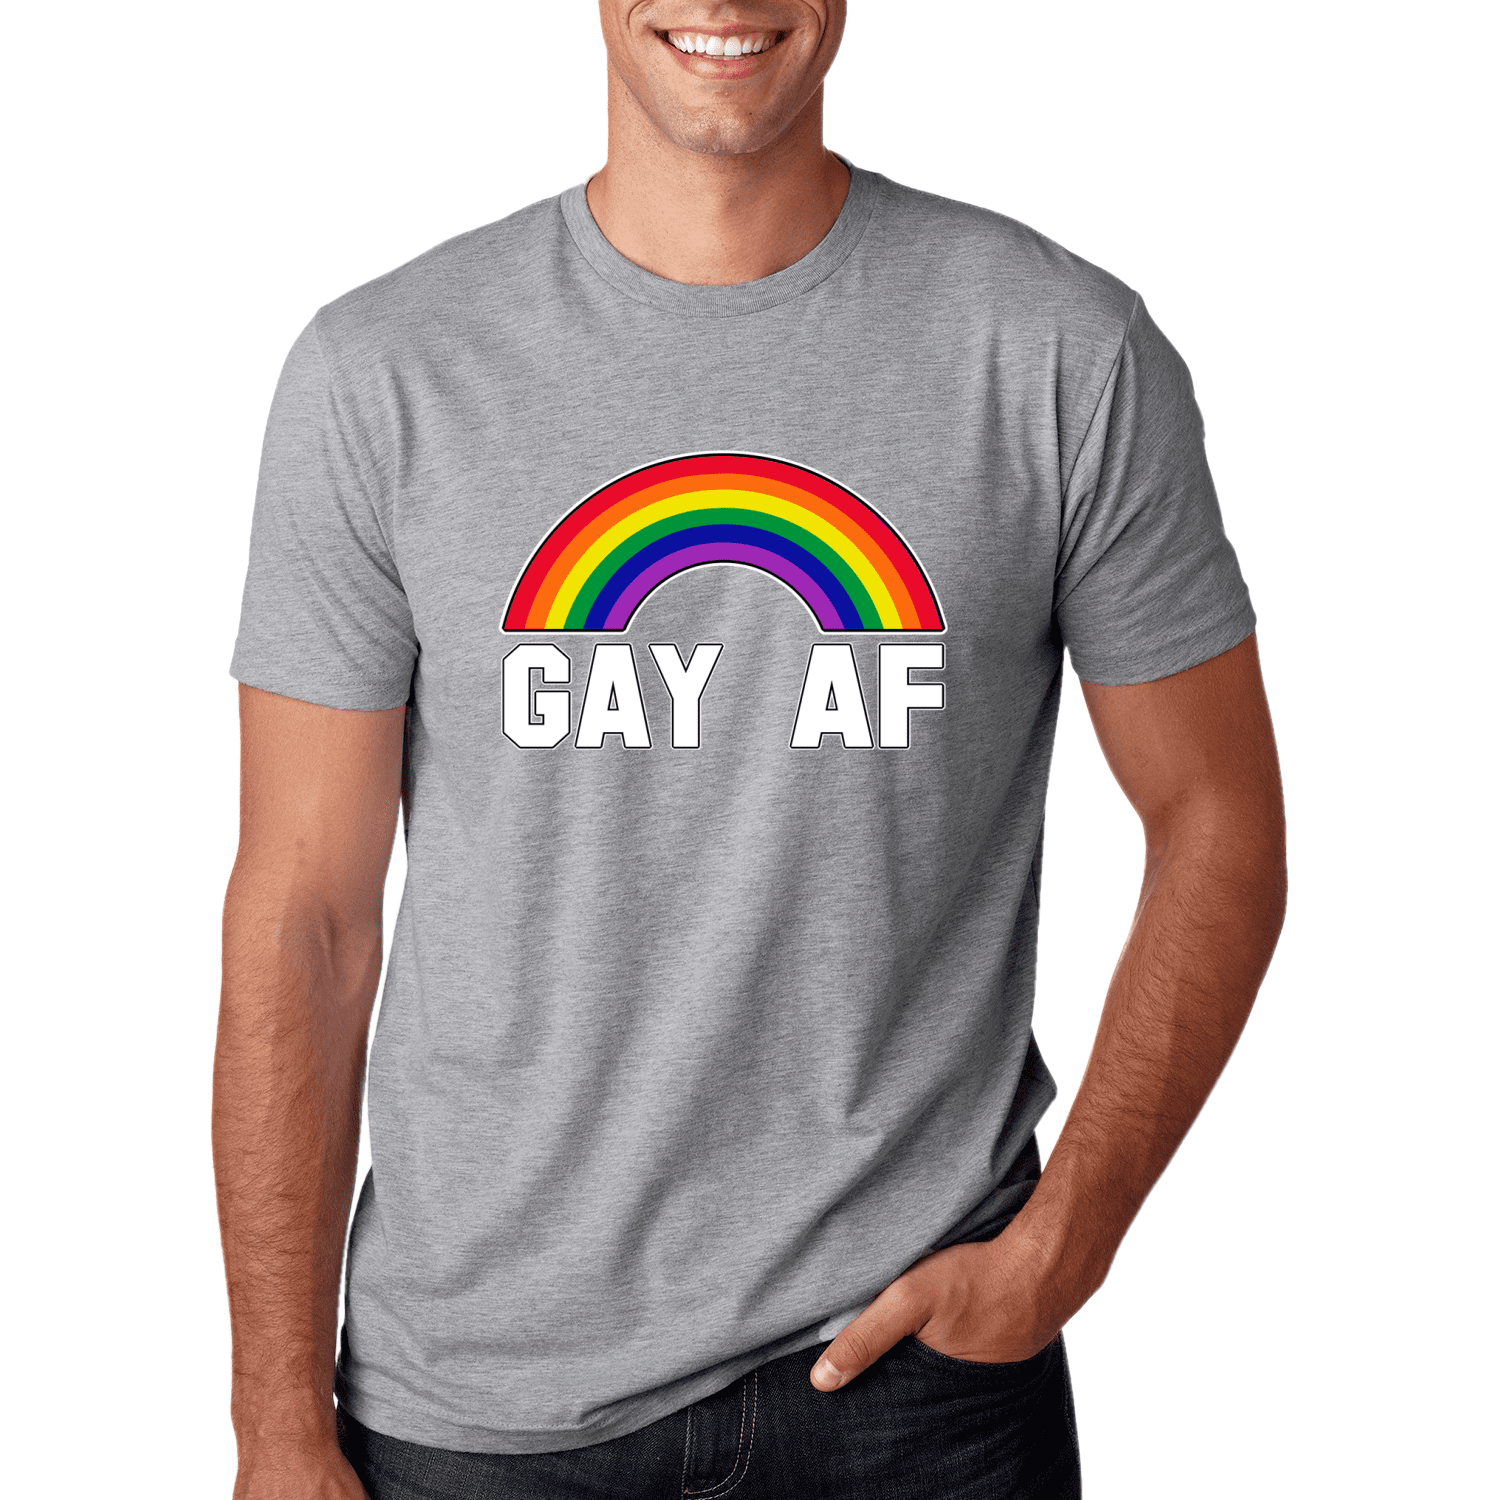 Rainbow Shirt Celebrate Pride Shirt The Only Choice I Made Was To Be Myself LGBT Shirt Pride Party Shirt Gender Equality Shirt Gay Tee